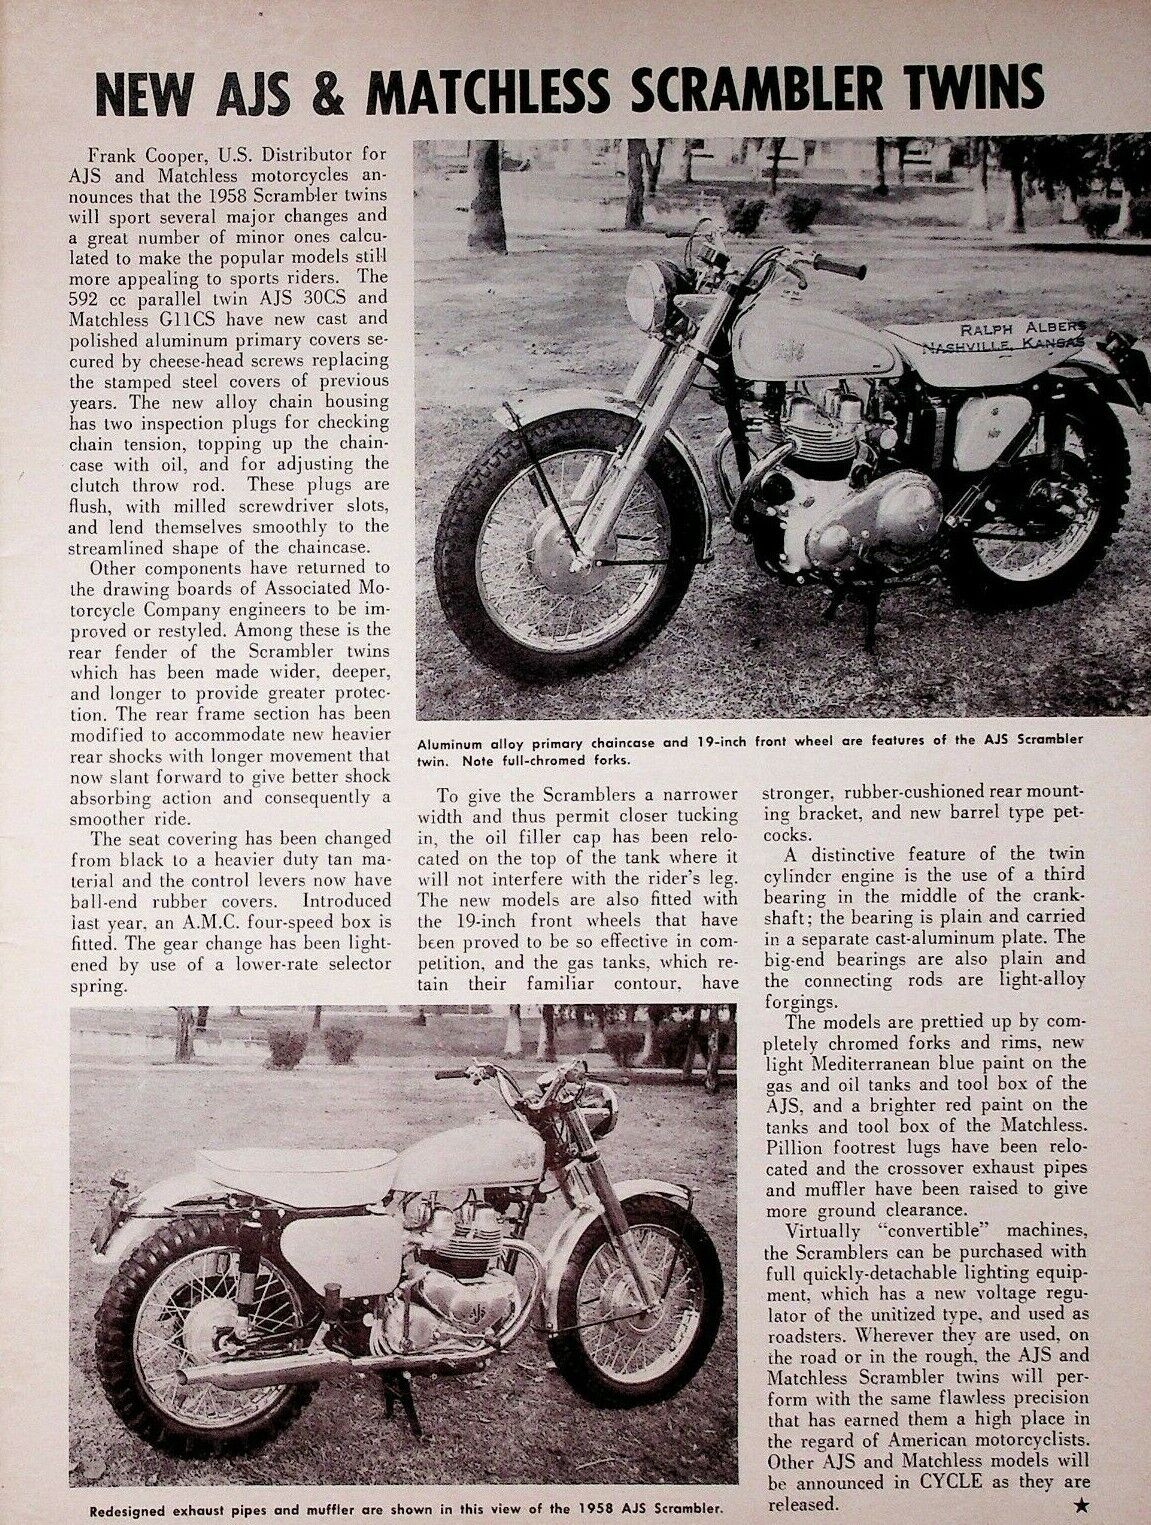 1958 New AJS & Matchless Scrambler Twins - 1-Page Vintage Motorcycle Article